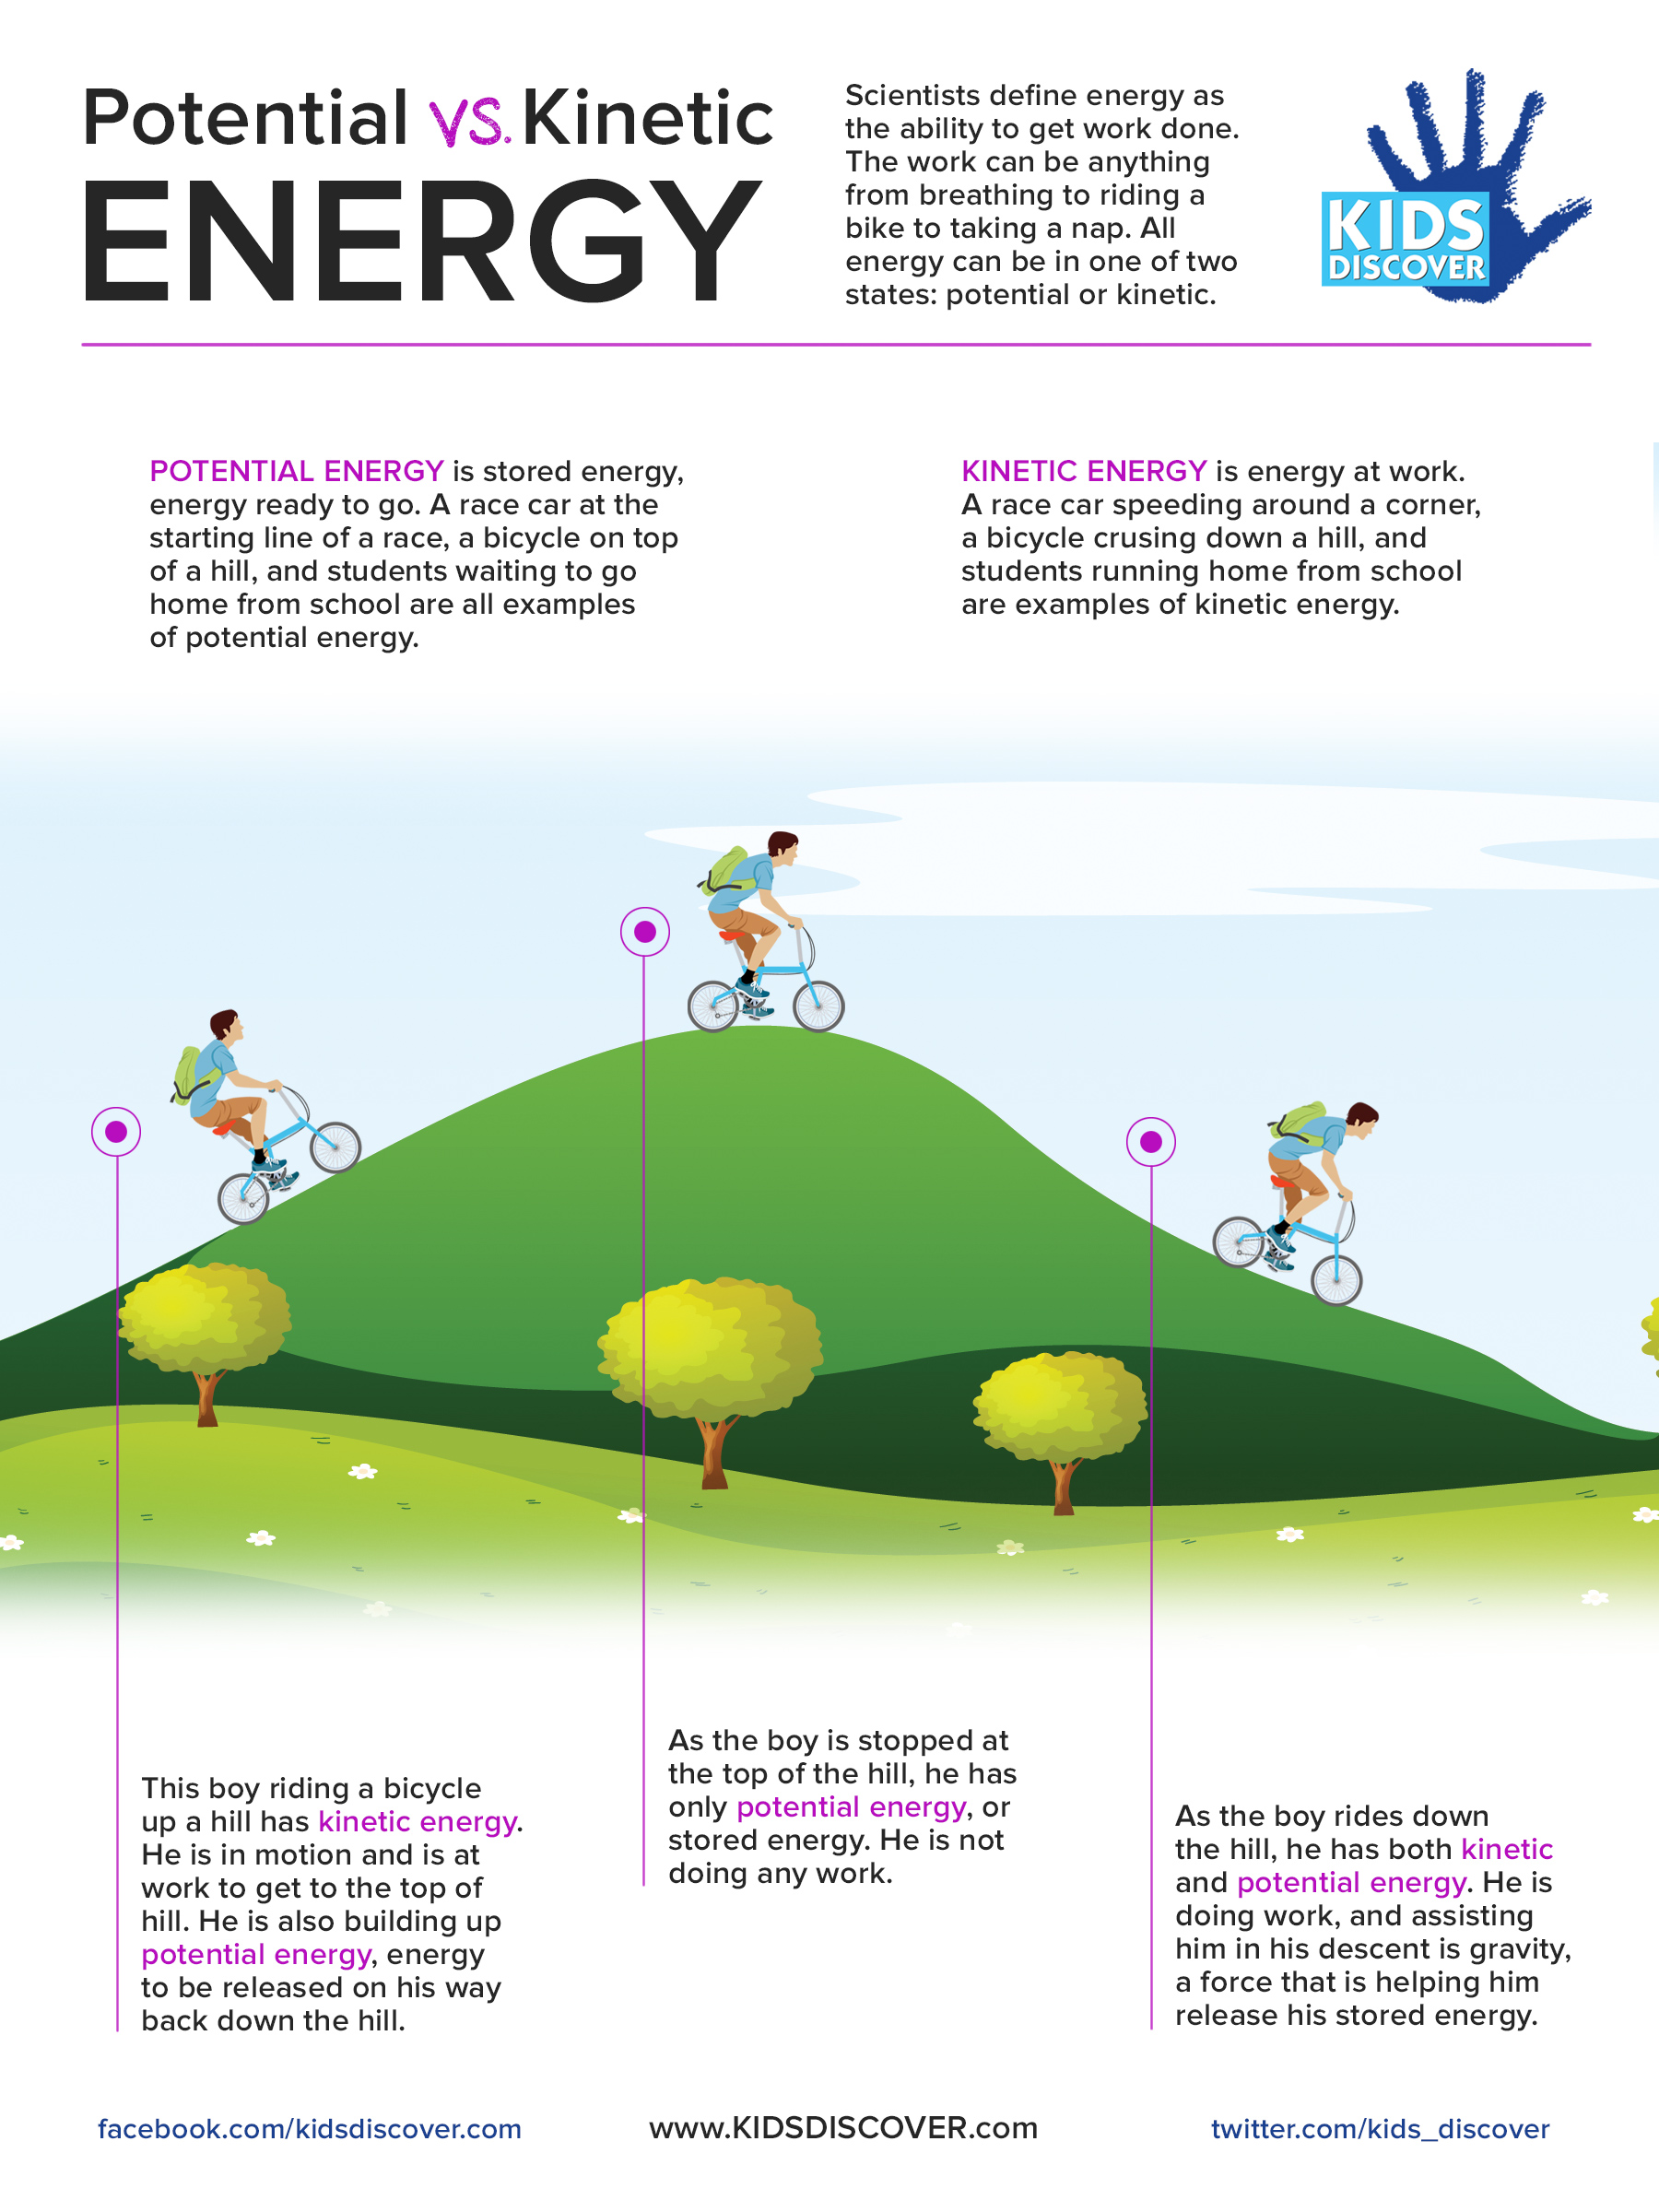 Infographic: Potential vs. Kinetic Energy - Kids Discover